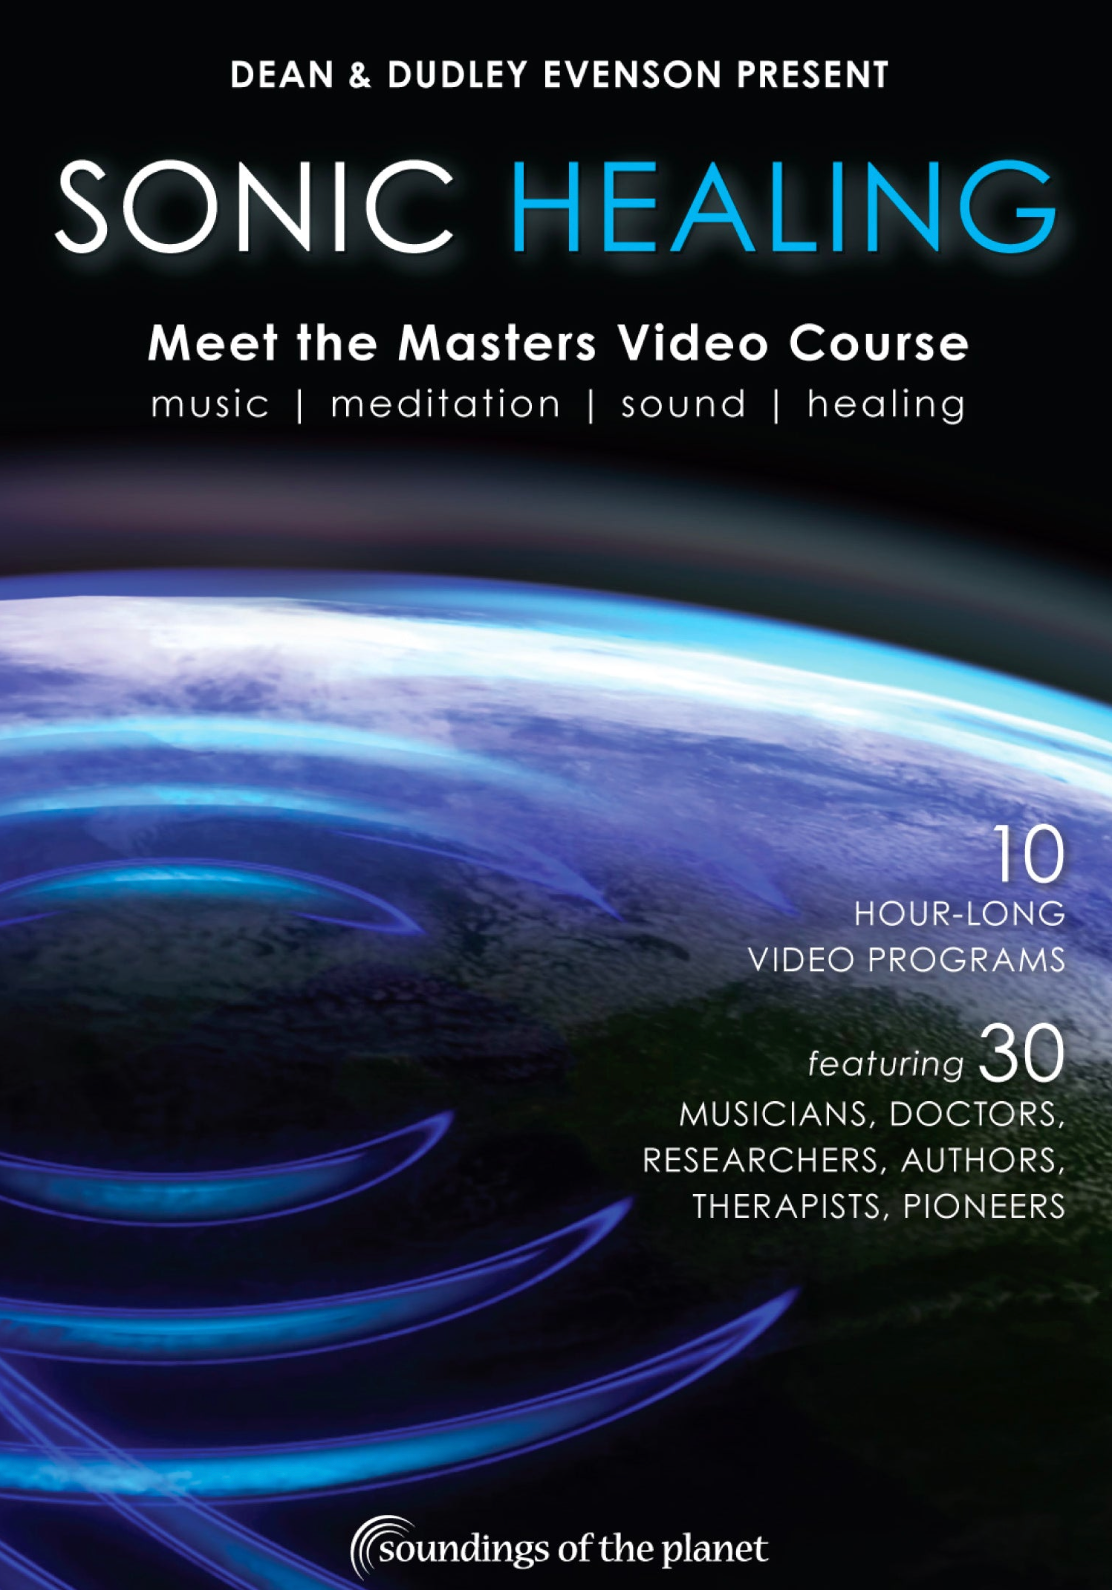 Sonic Healing – Meet the Masters Video Course